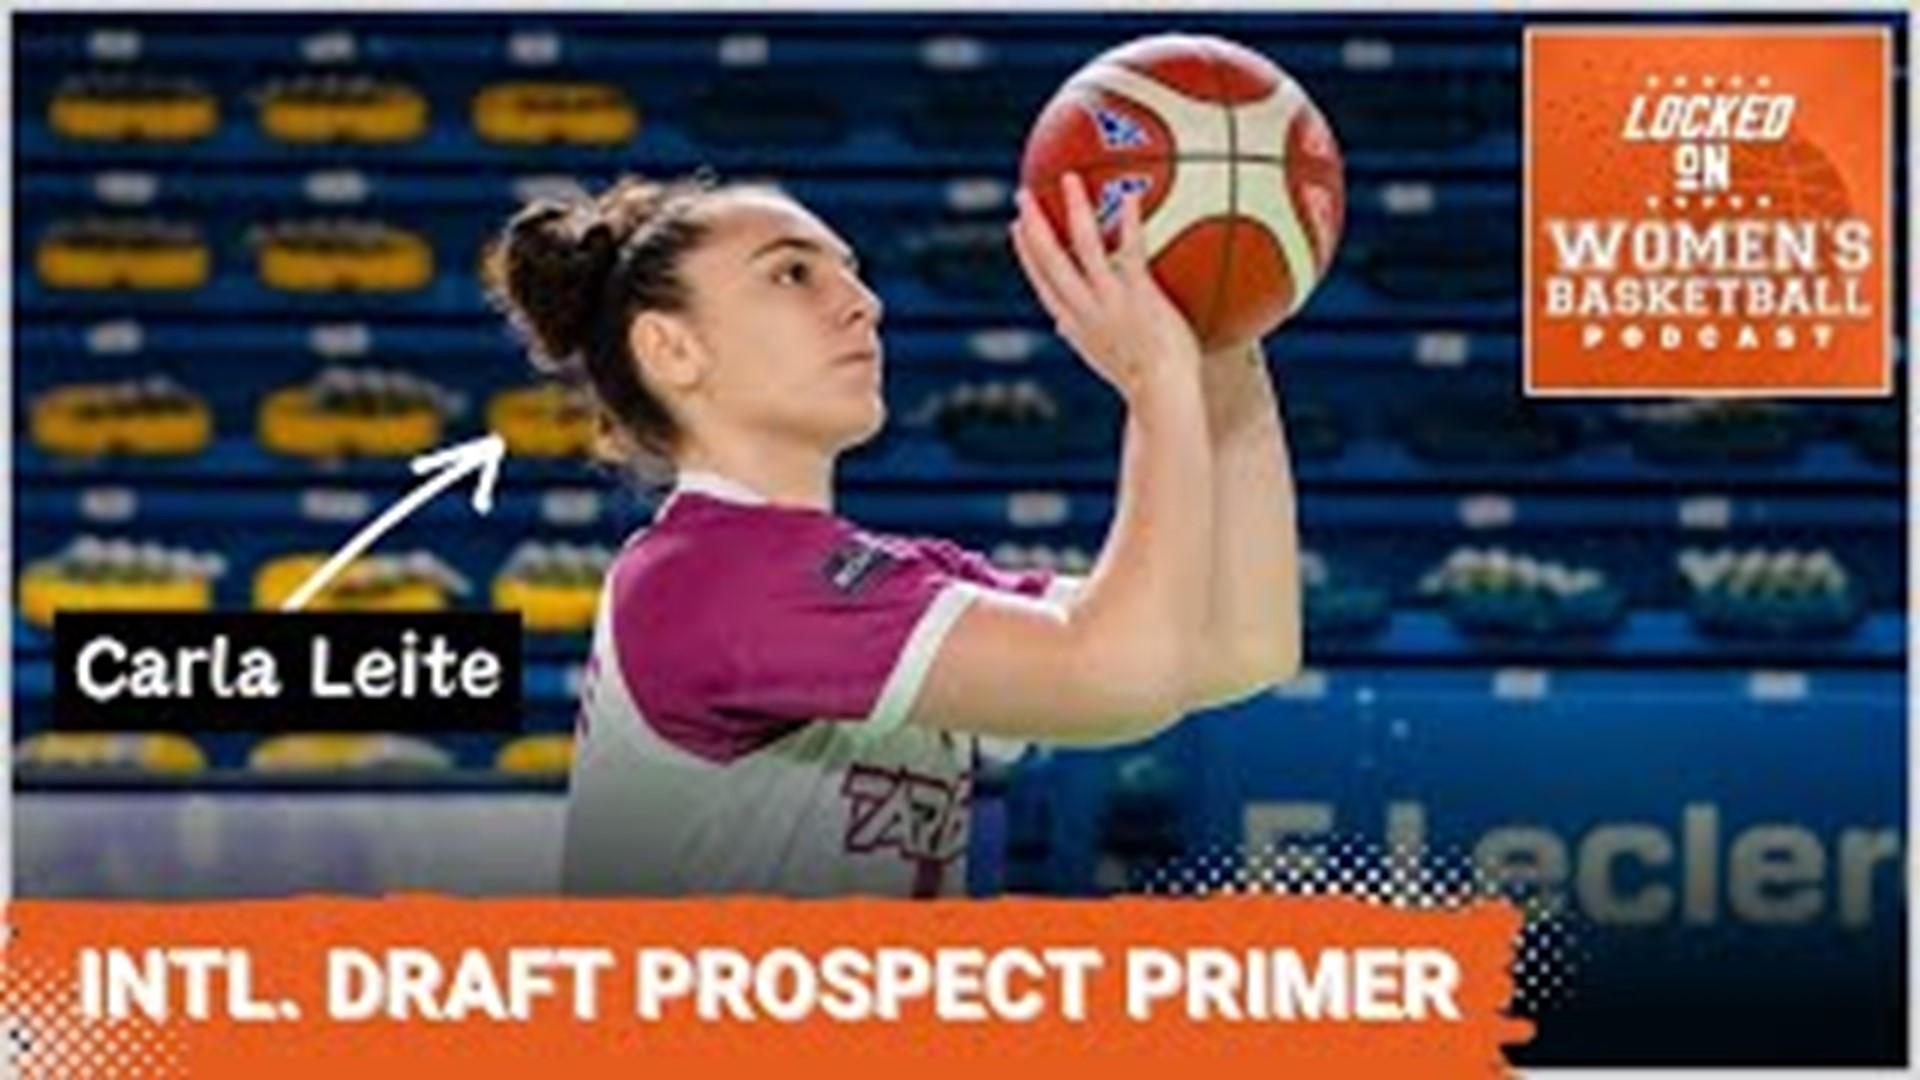 Host Hunter Cruse is joined by co-hosts Em Adler and Lincoln Shafer to talk about the top international prospects in the 2024 WNBA Draft, which includes Leïla Lacan.